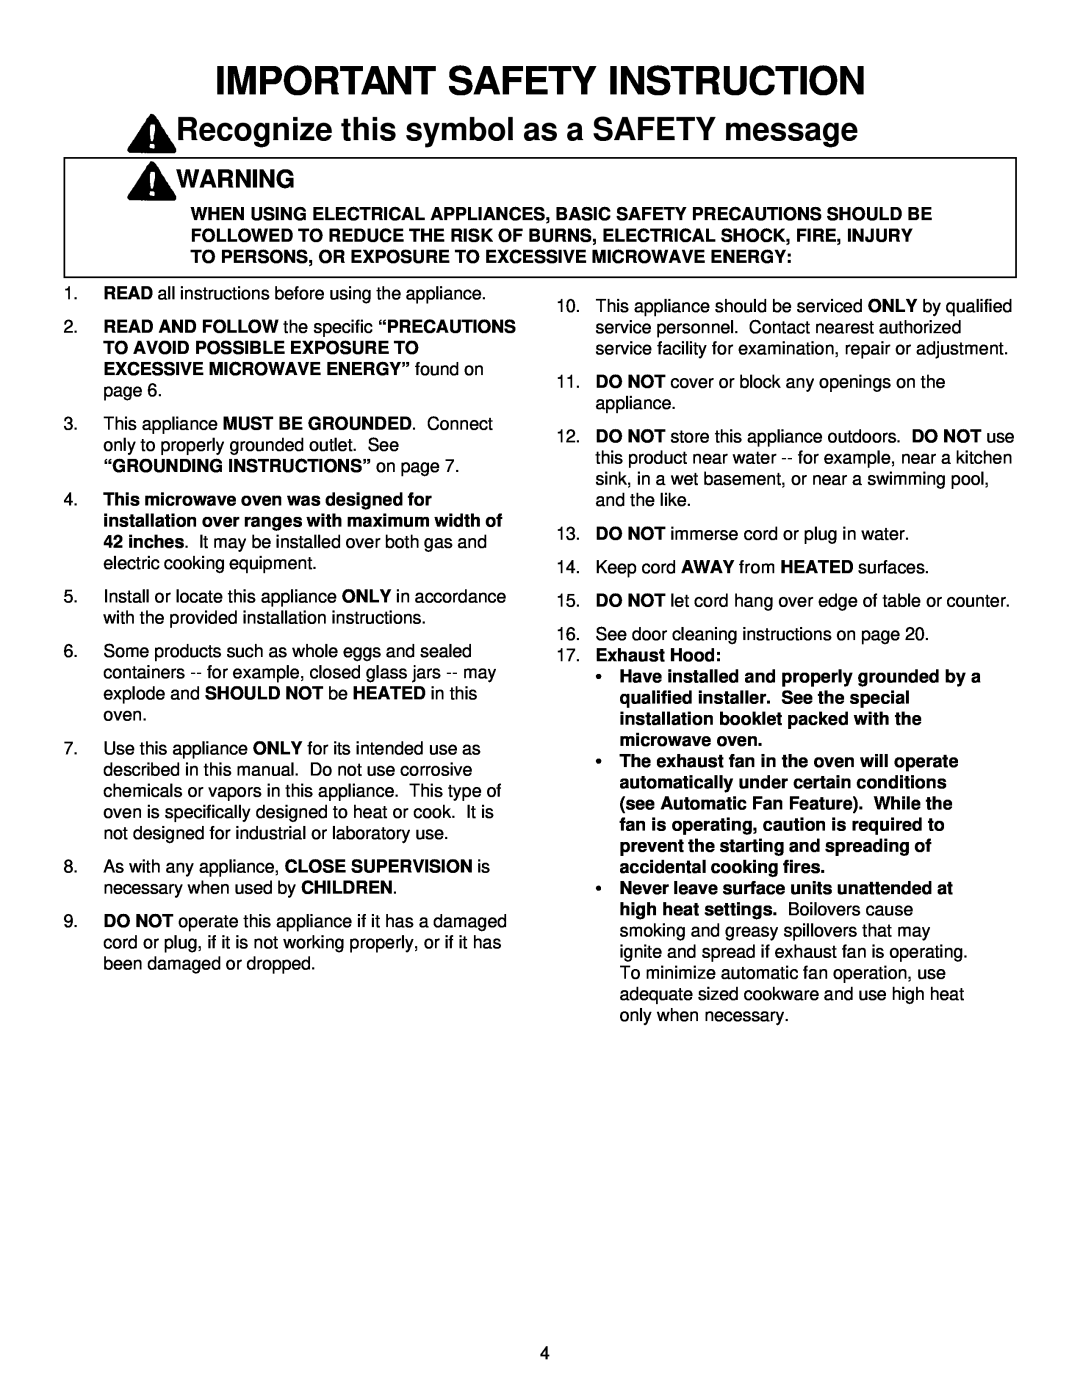 Amana MVH220W, MH220E manual Important Safety Instruction, Recognize this symbol as a SAFETY message 